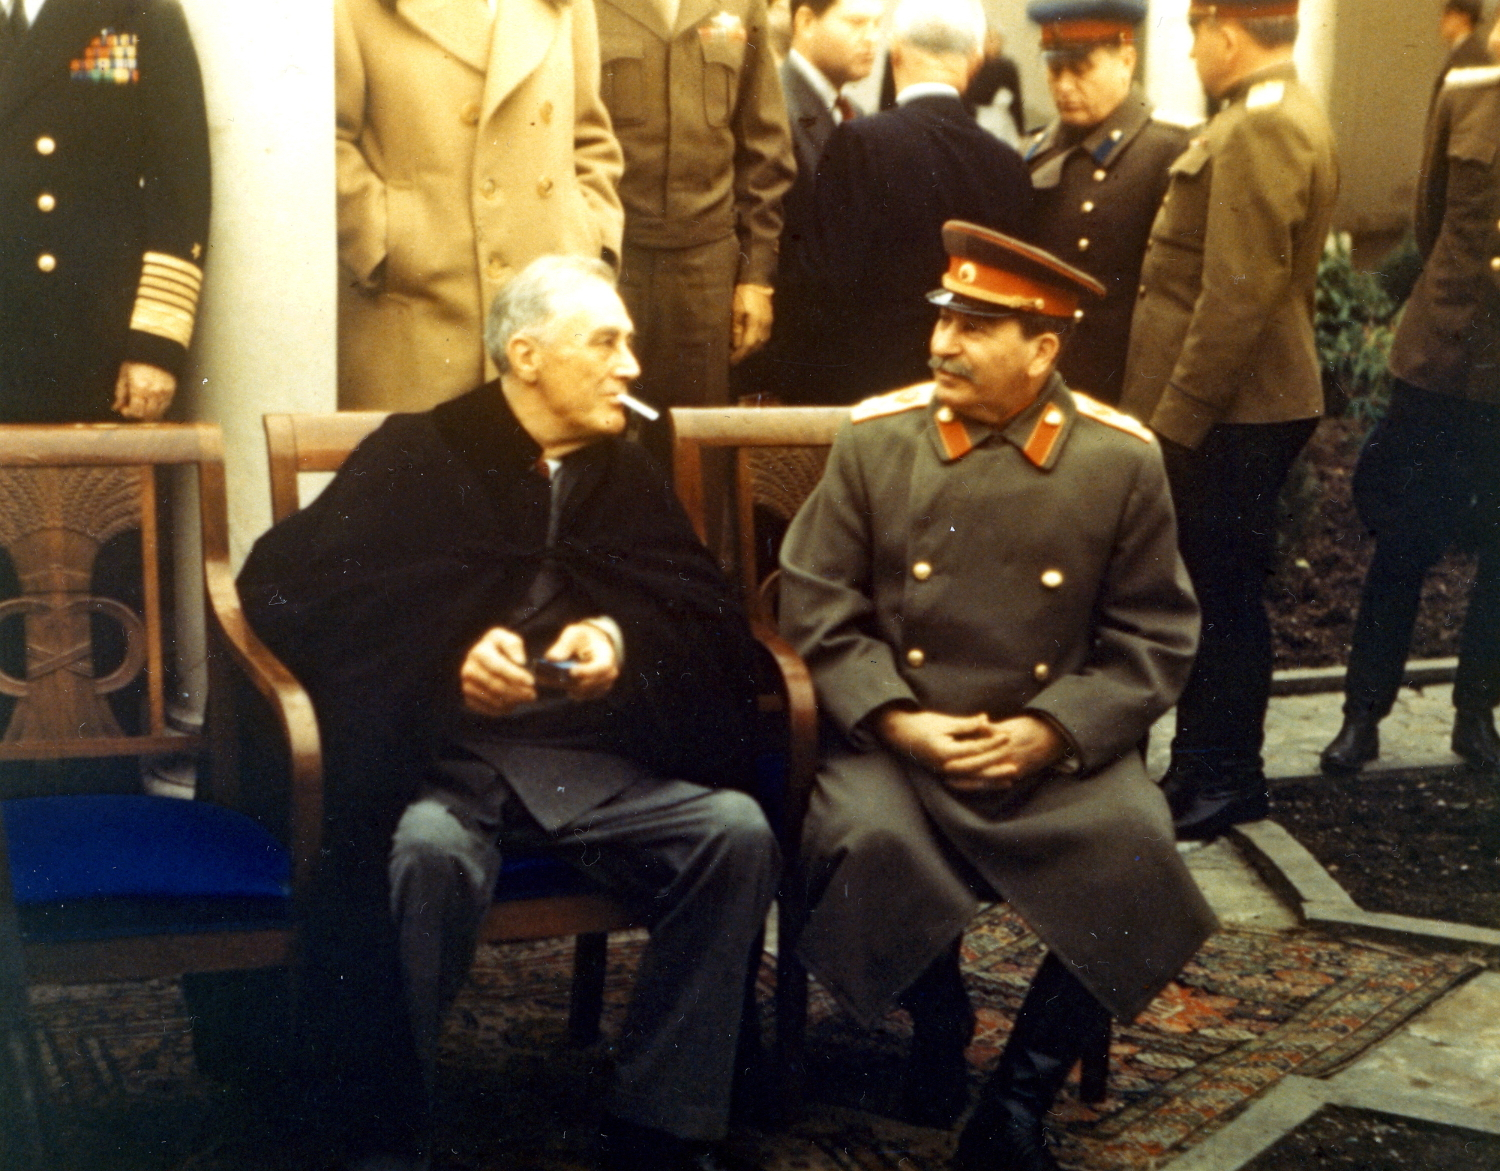 The Yalta Agreement Background Information